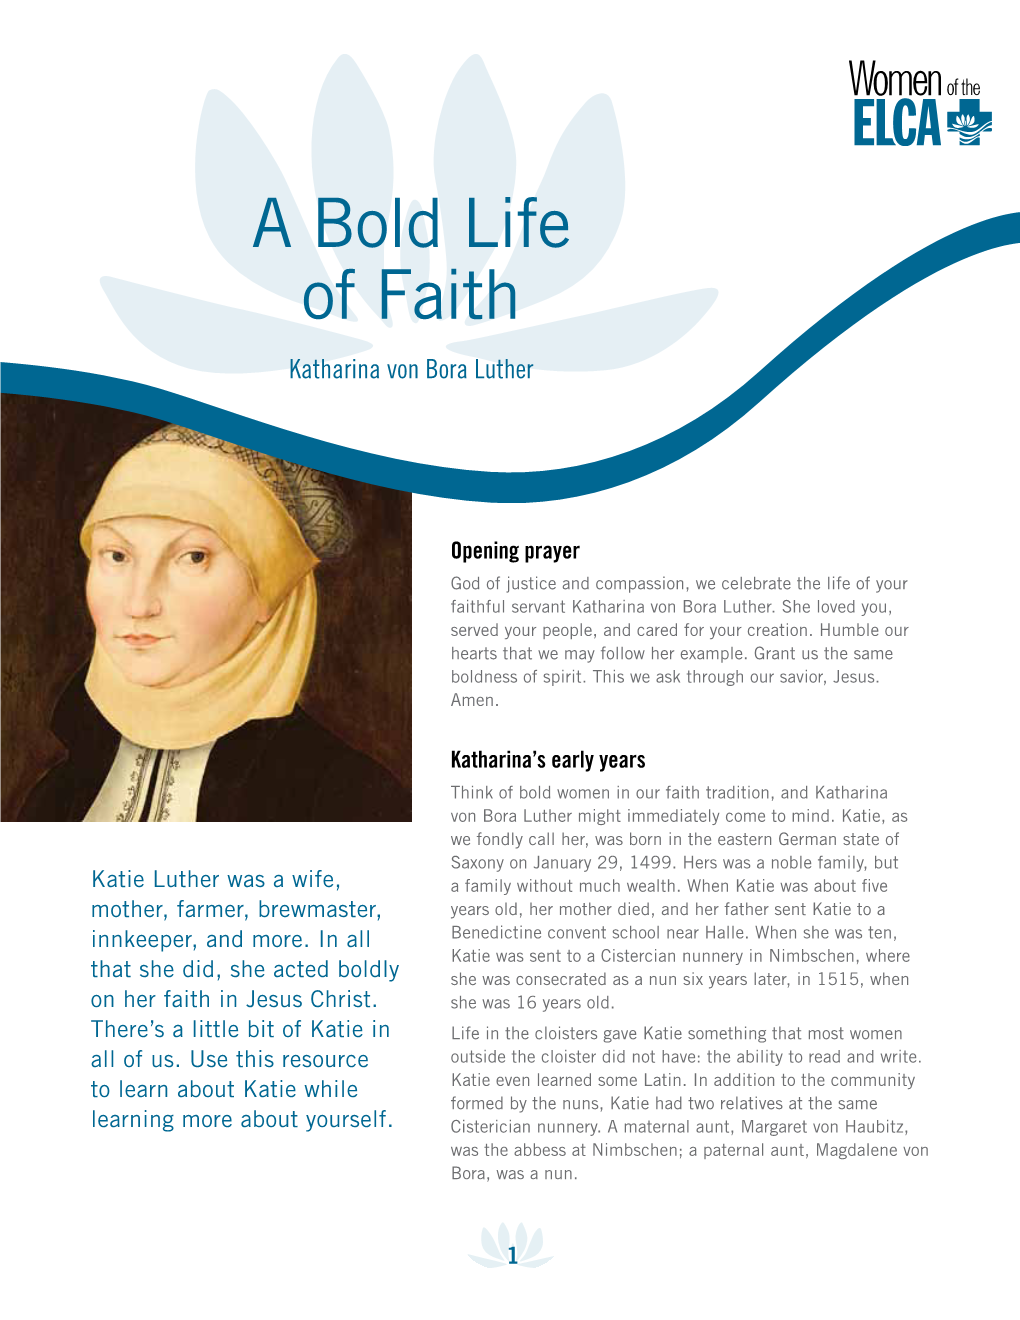 A Bold Life of Faith: Katharina Von Bora Luther Was Written by Linda Post Bushkofsky, Executive Director, Women of the ELCA